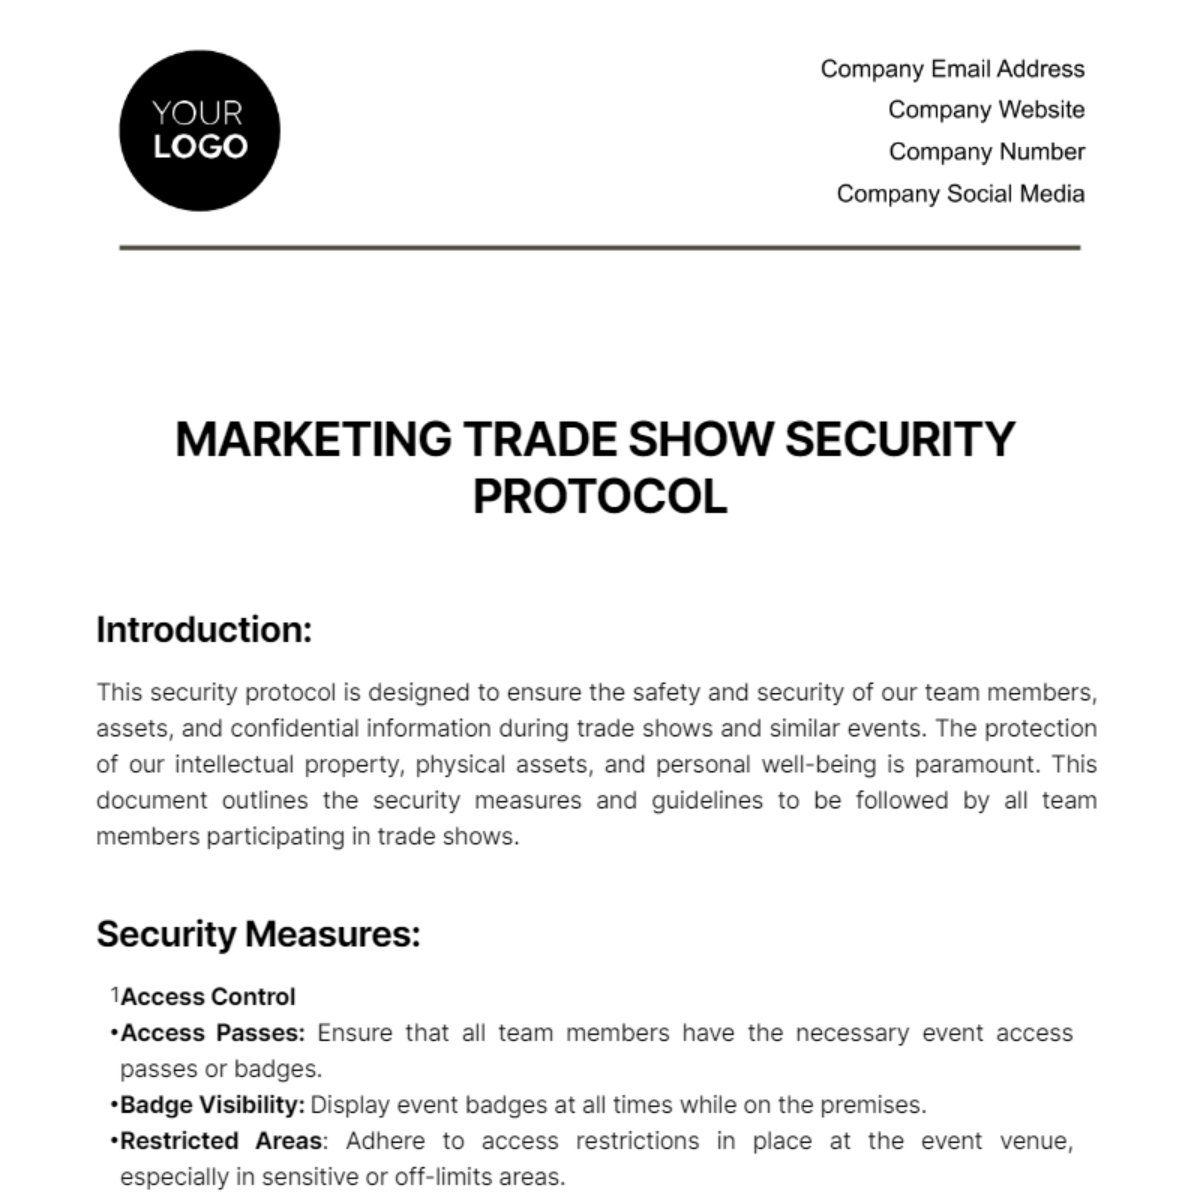 Marketing Trade Show Security Protocol Template